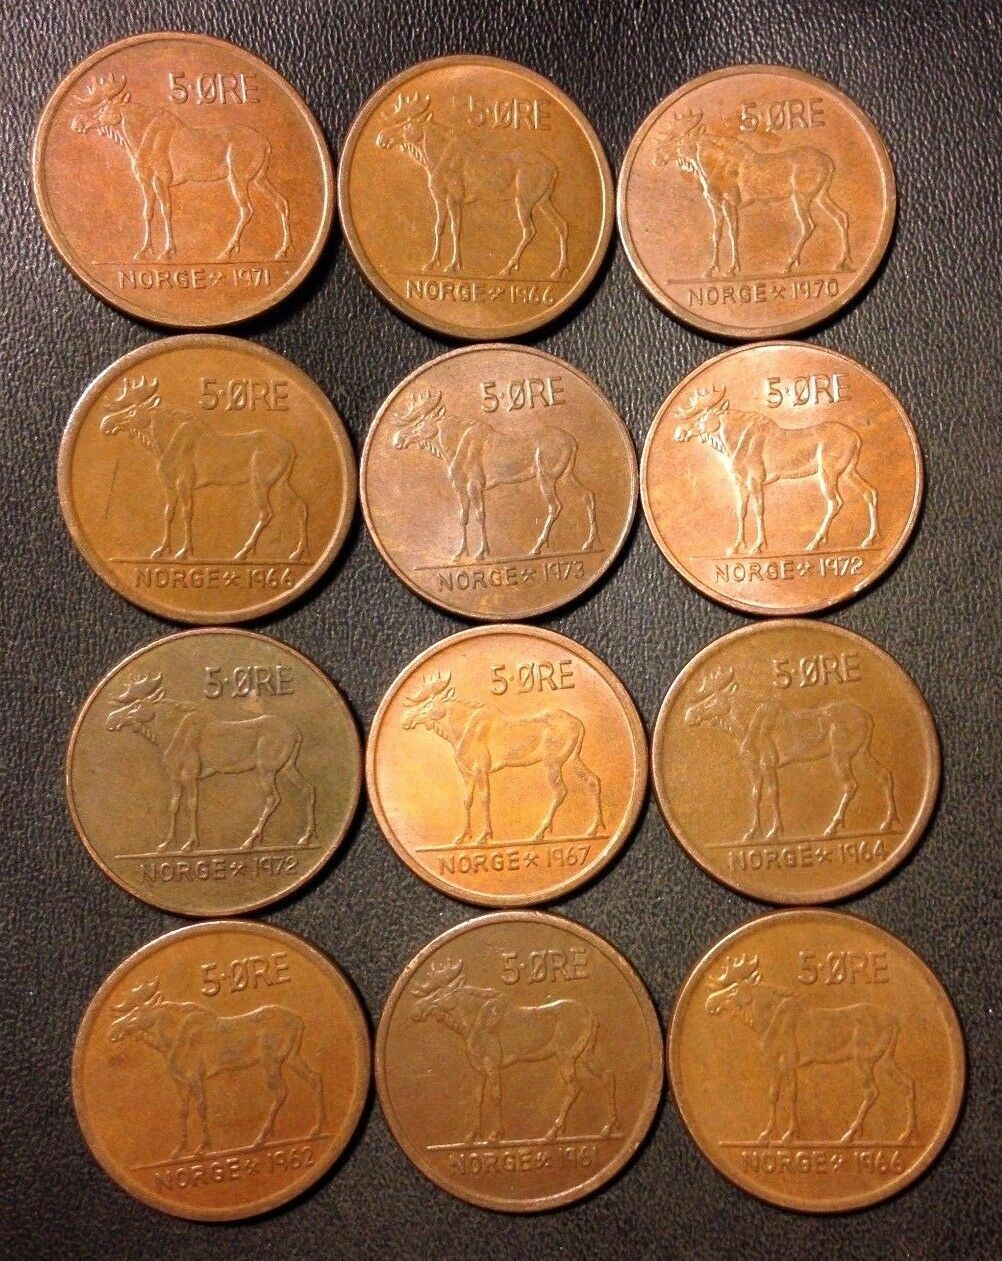 Vintage Norway Coin Lot - 5 Ore - Moose Type - 12 Great Coins - Lot #s17